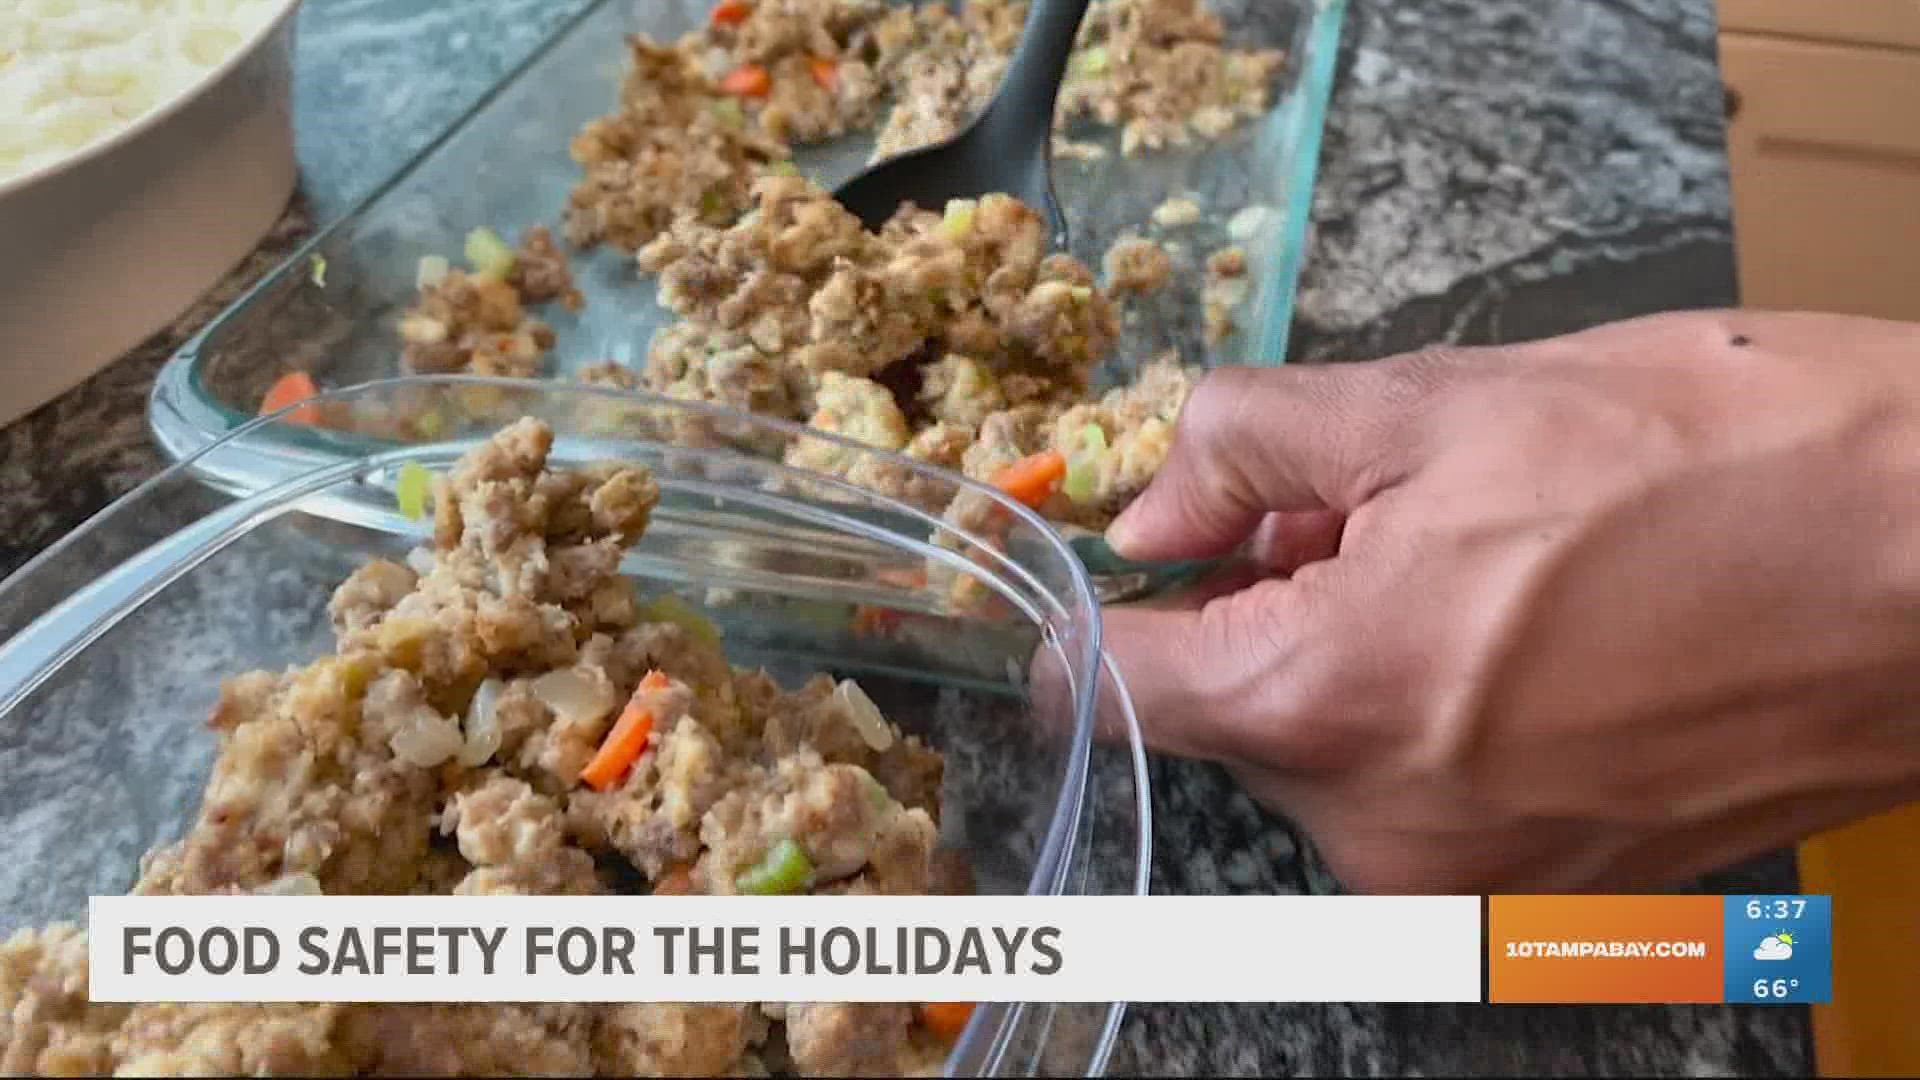 The U.S. Department of Agriculture says the Monday after Thanksgiving is the last day people can safely eat refrigerated leftovers.